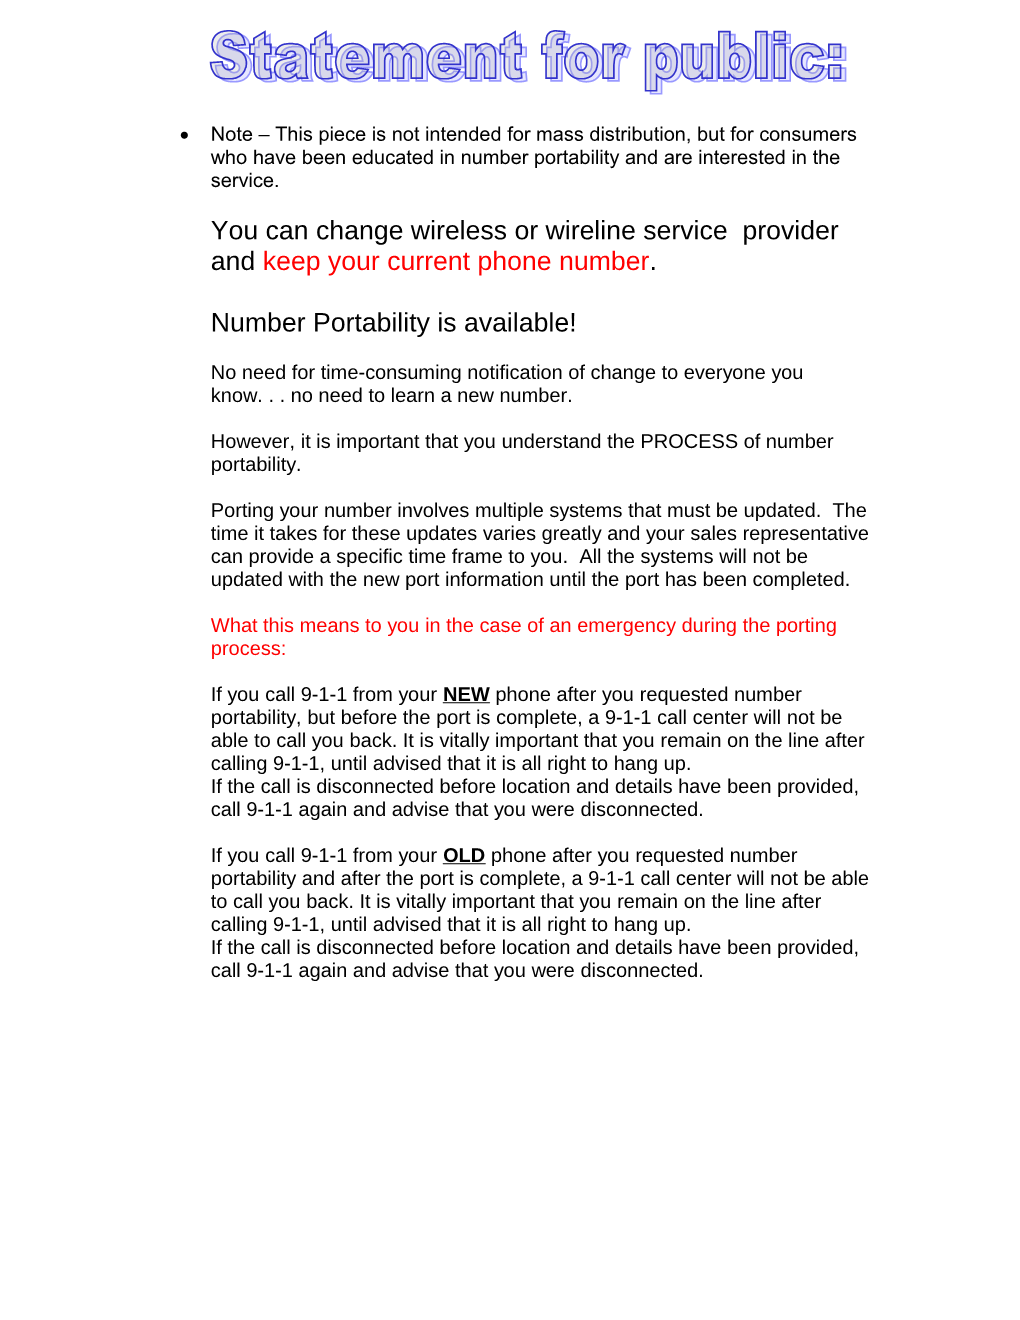 There Is a 9-1-1 Call Back Issue Related to Number Portability. It Occurs If There Is Mixed/Dual